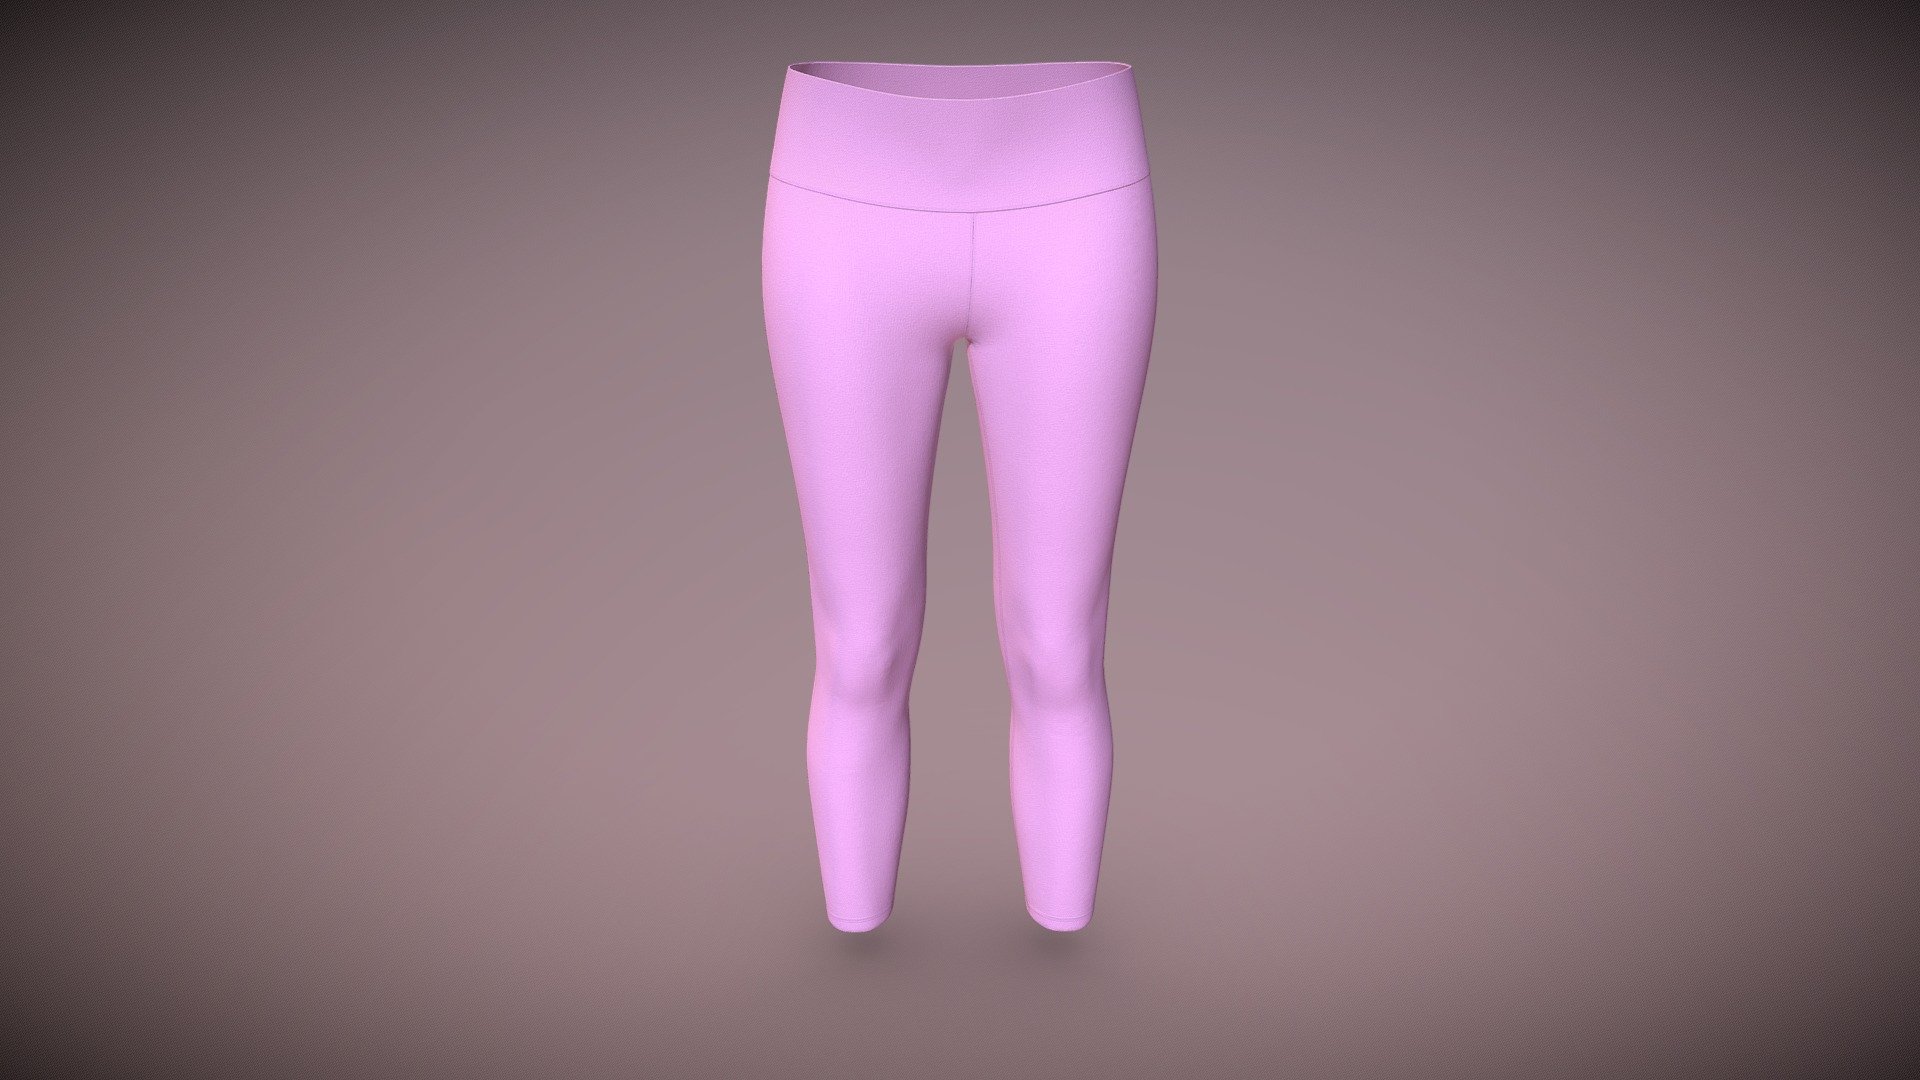 Cloth Title = Women's Mid-Waisted Leggings 

SKU = DG100136 

Category = Women 

Product Type = Leggings 

Cloth Length = Regular 

Body Fit = Skinny Fit 

Occasion = Activewear  

Waist Rise = Mid Rise 


Our Services:

3D Apparel Design.

OBJ,FBX,GLTF Making with High/Low Poly.

Fabric Digitalization.

Mockup making.

3D Teck Pack.

Pattern Making.

2D Illustration.

Cloth Animation and 360 Spin Video.


Contact us:- 

Email: info@digitalfashionwear.com 

Website: https://digitalfashionwear.com 


We designed all the types of cloth specially focused on product visualization, e-commerce, fitting, and production. 

We will design: 

T-shirts 

Polo shirts 

Hoodies 

Sweatshirt 

Jackets 

Shirts 

TankTops 

Trousers 

Bras 

Underwear 

Blazer 

Aprons 

Leggings 

and All Fashion items. 





Our goal is to make sure what we provide you, meets your demand 3d model